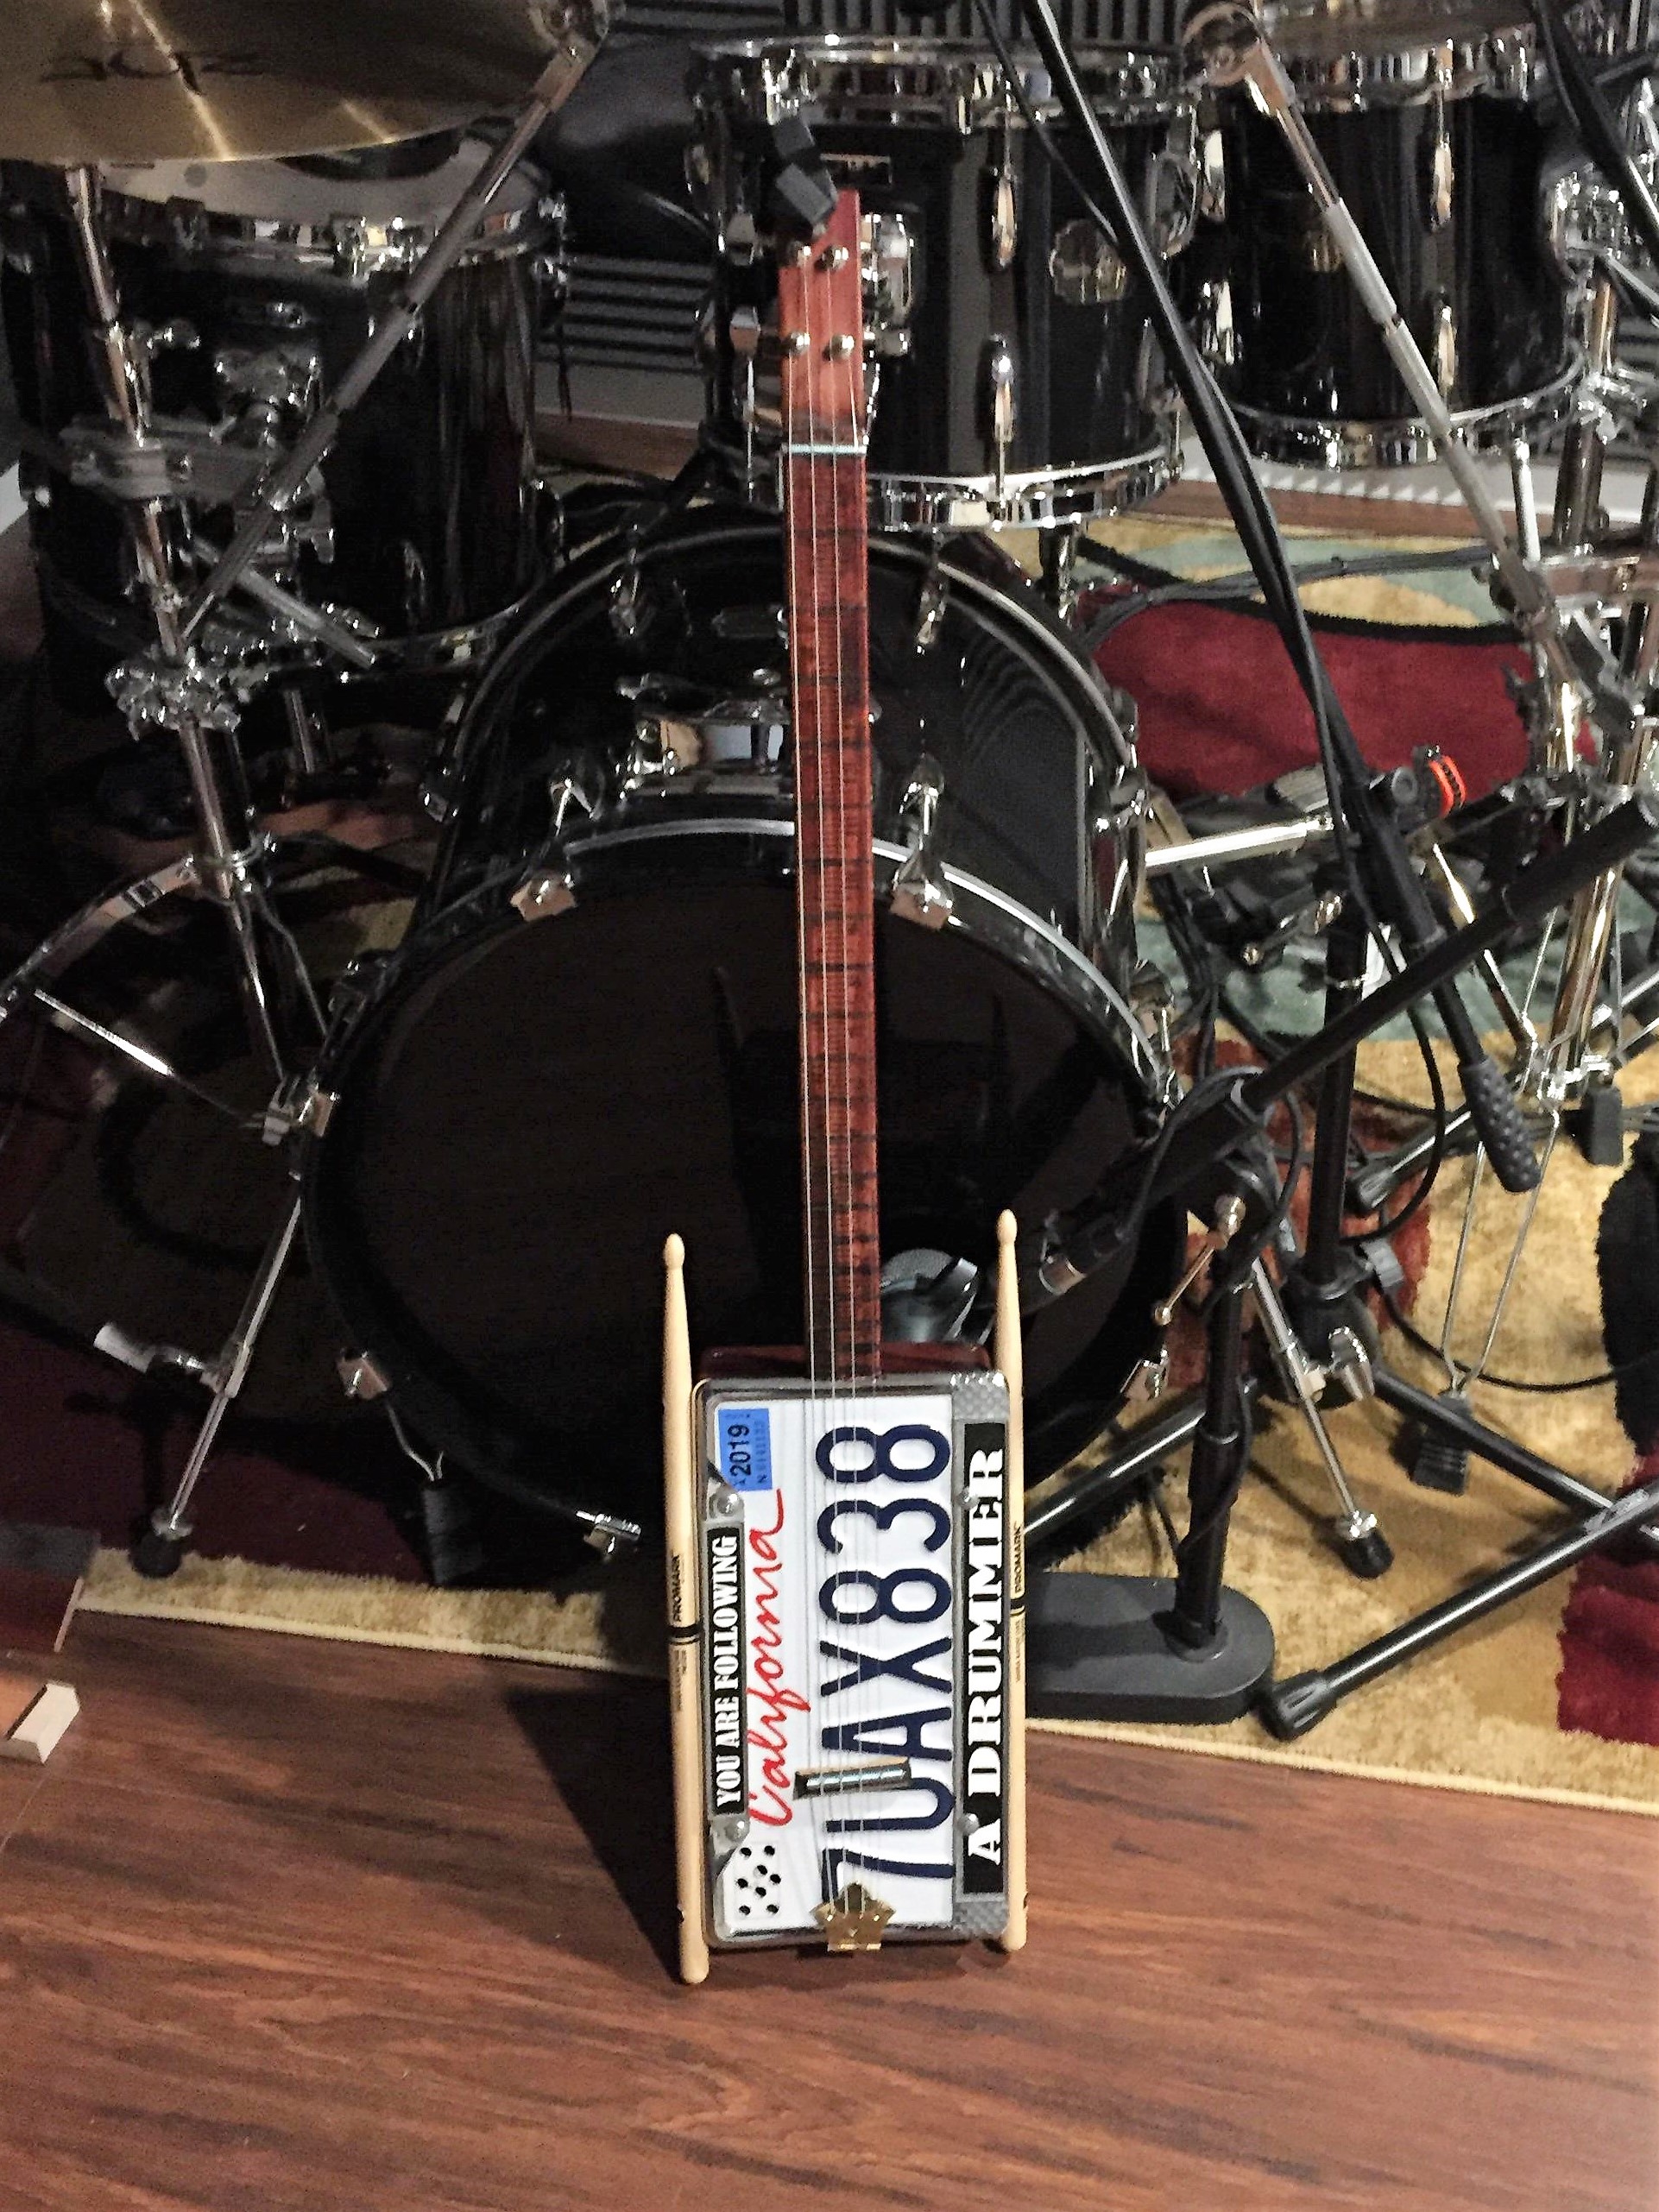 Cali Drummer's Guitar by William D.